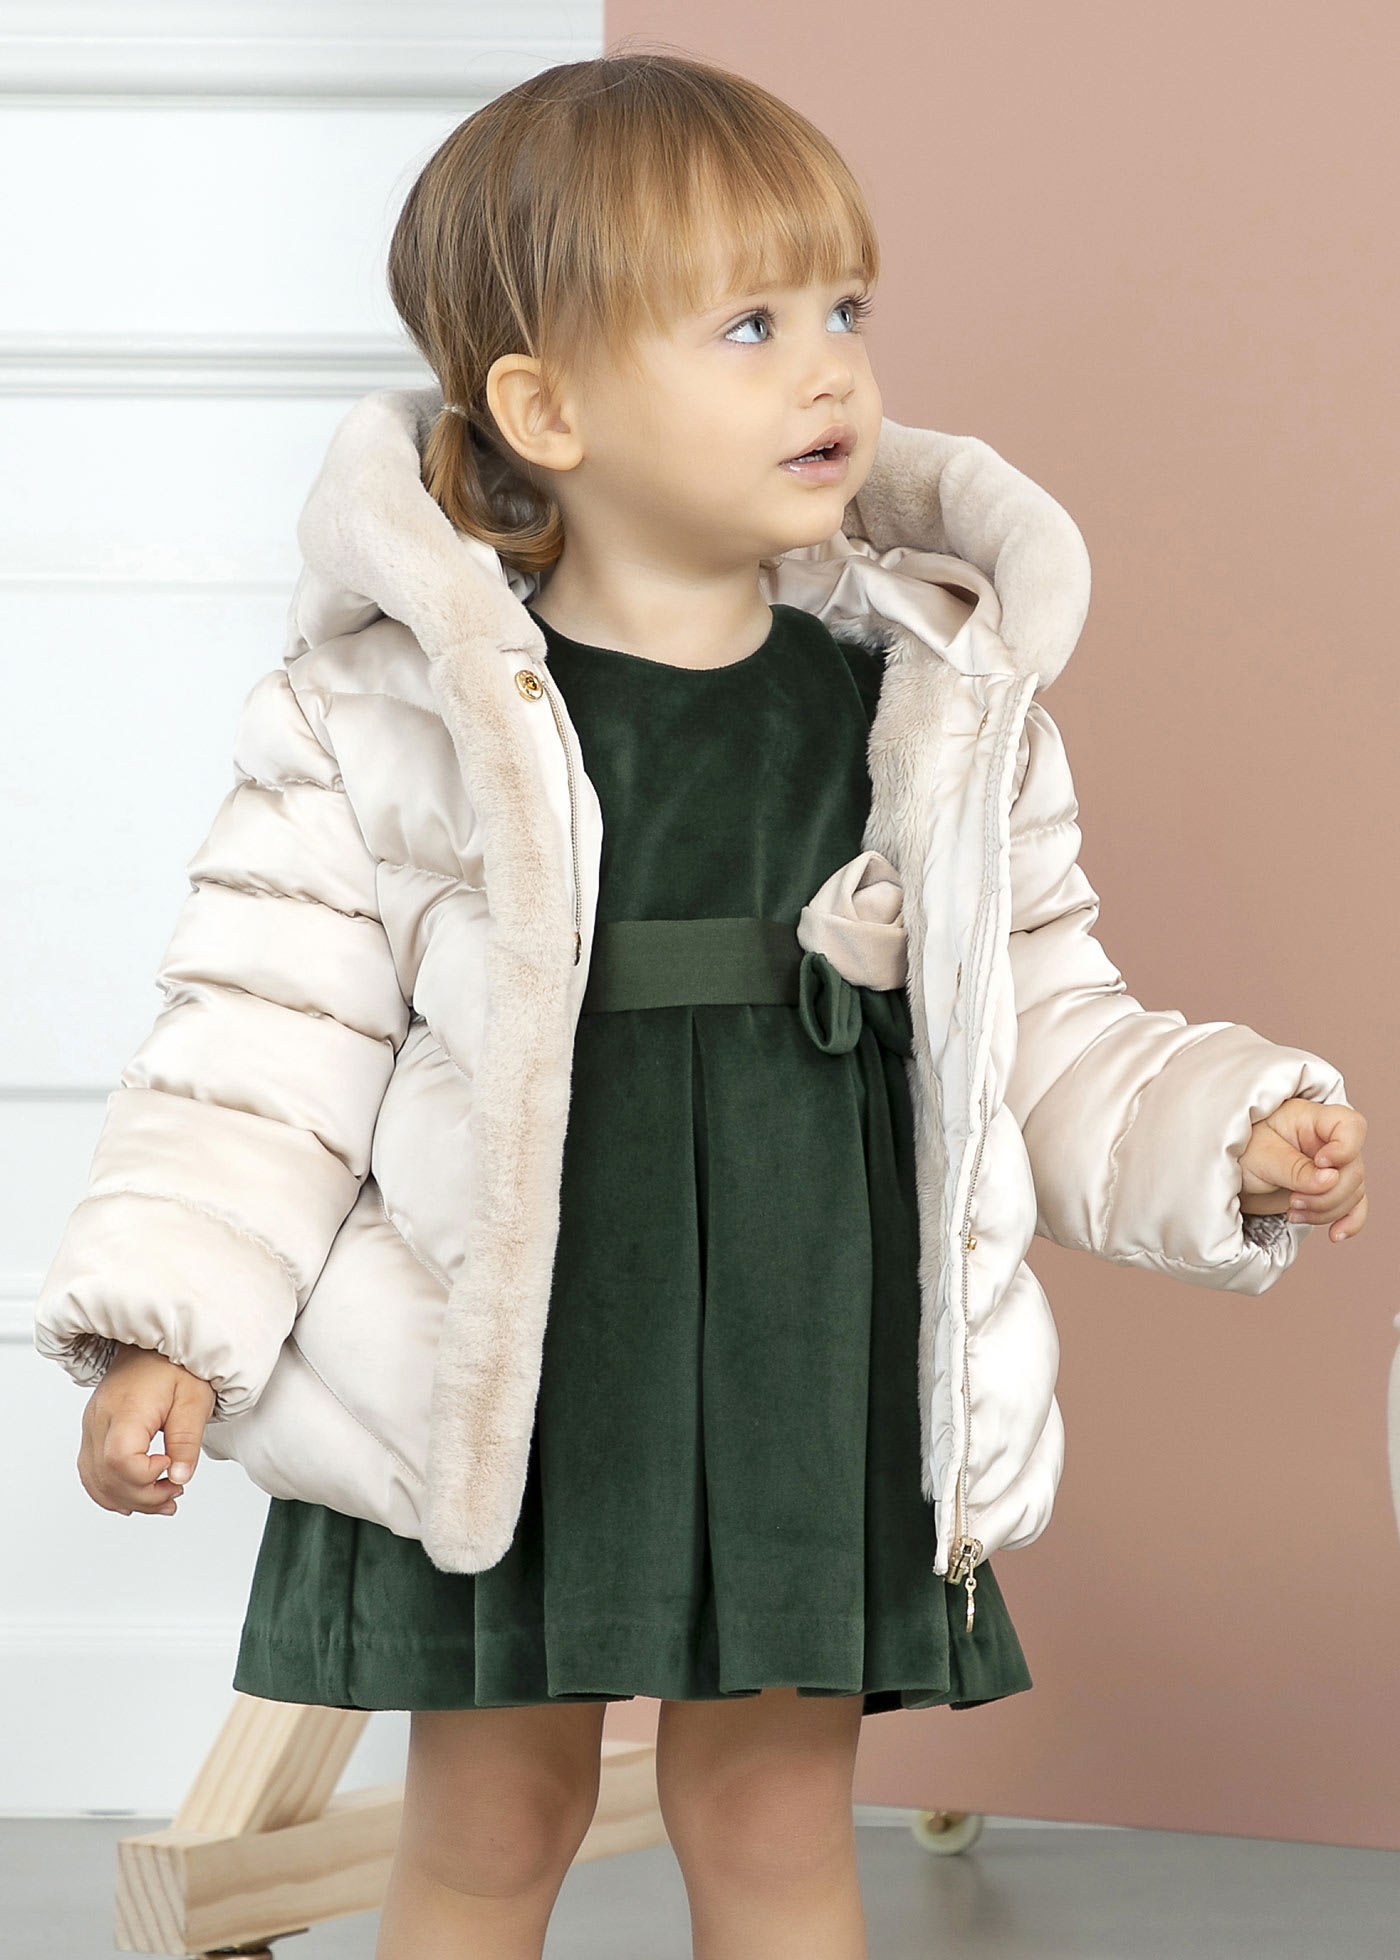 Baby satin coat with fur details